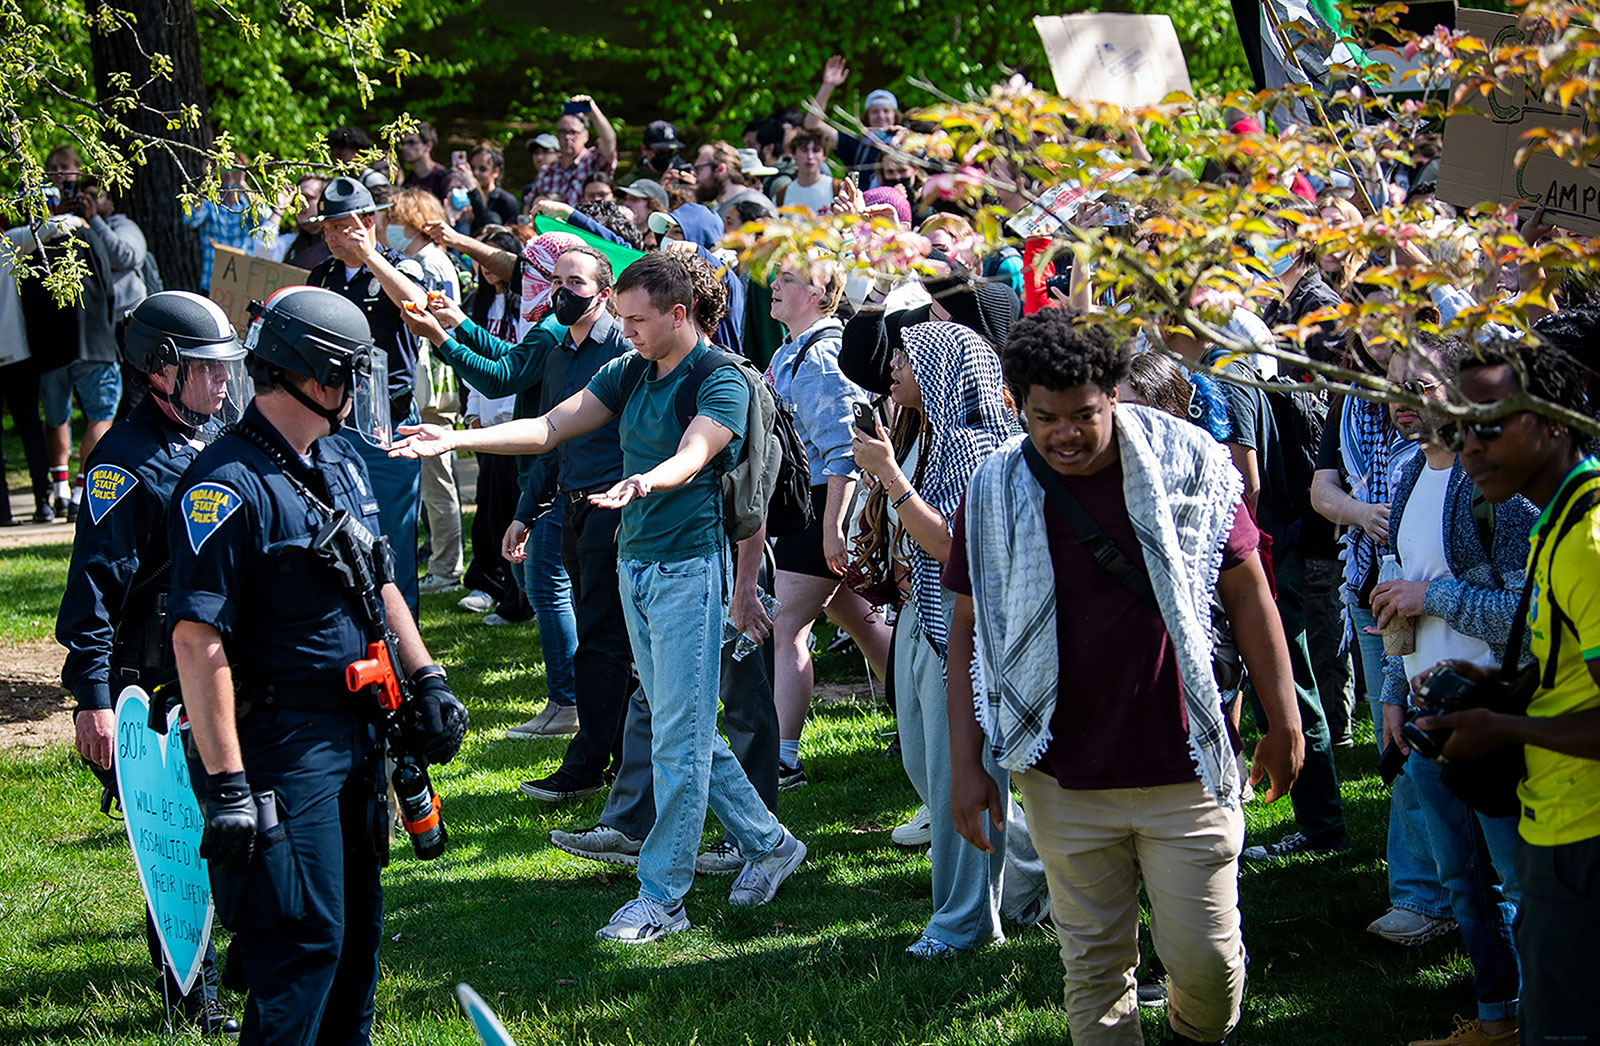 Demonstrators urge police to leave, after officers had begun to depart, at Dunn Meadow on the Indiana University Bloomington campus on Thursday, April 25.